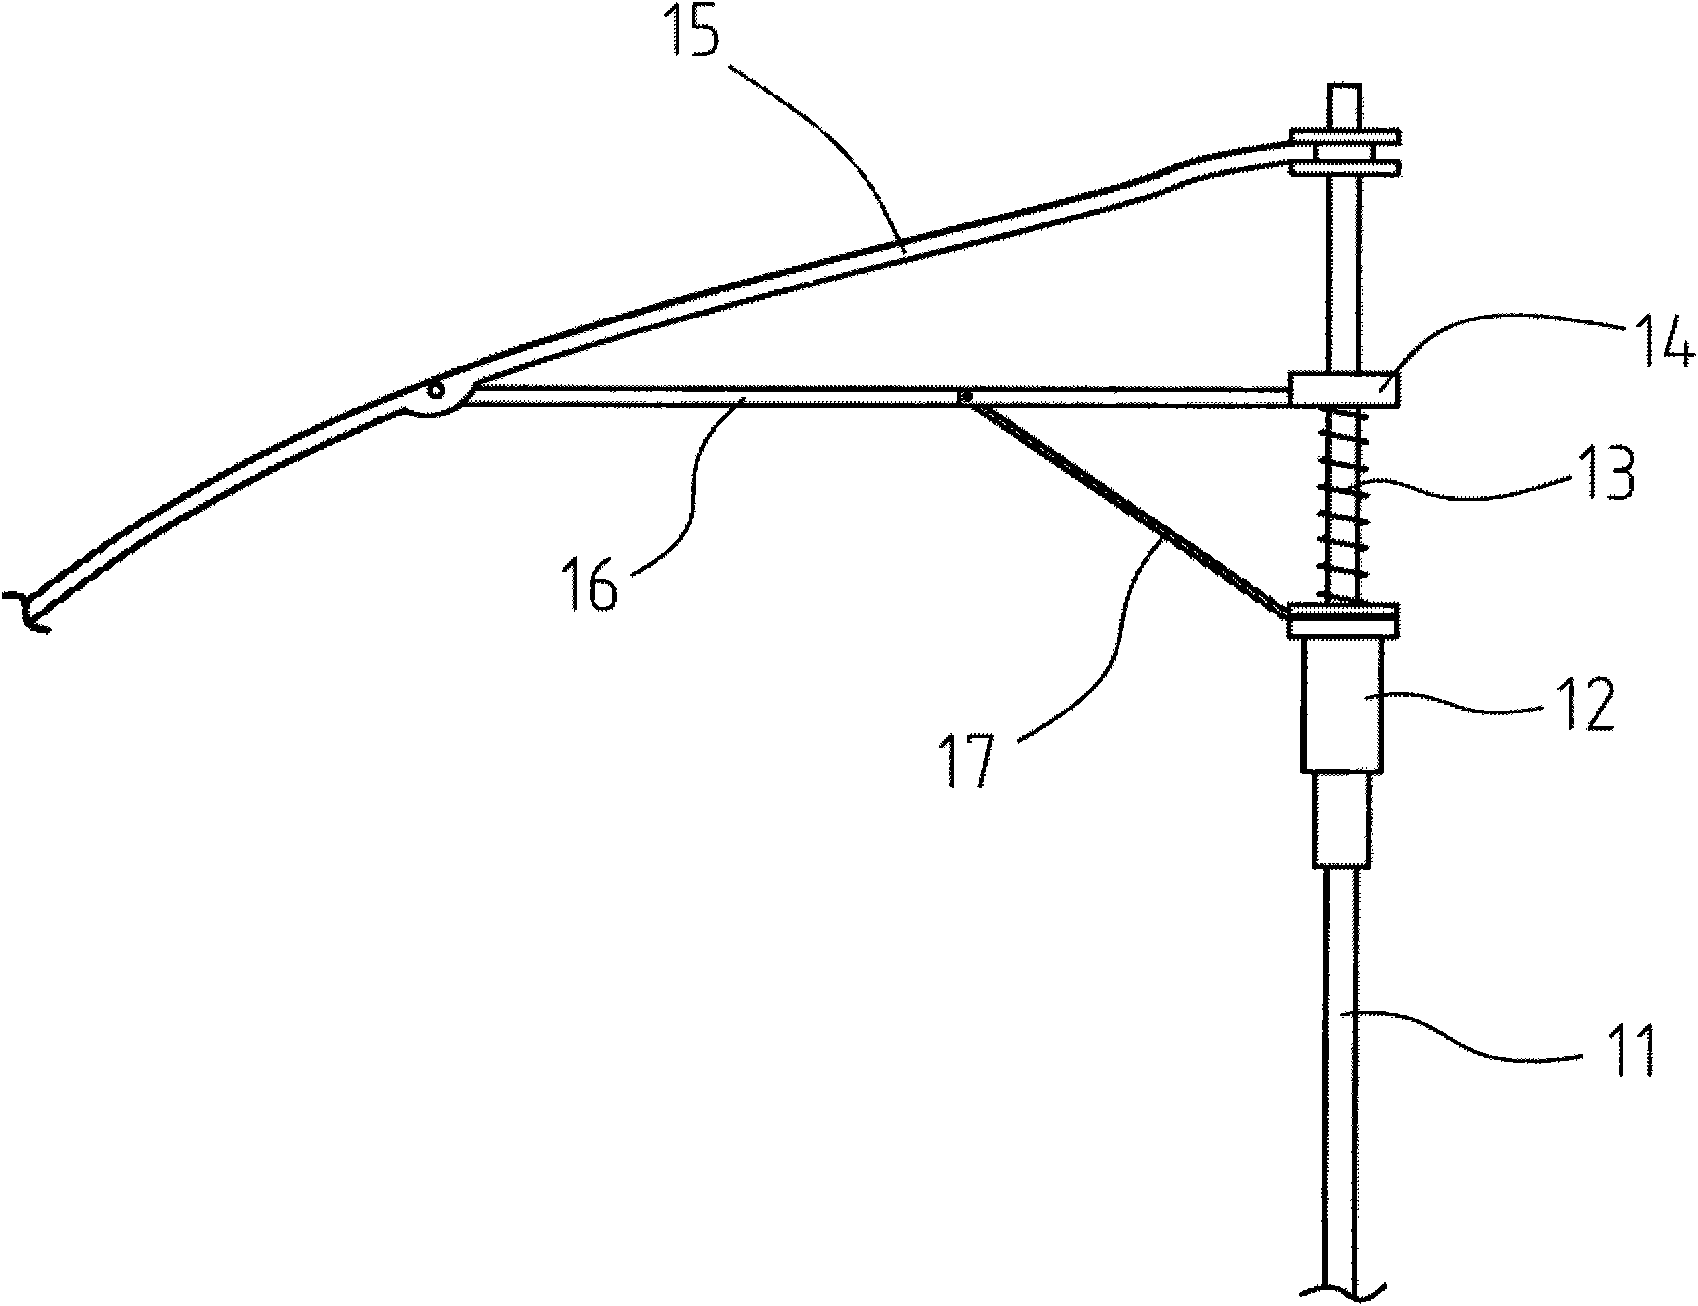 Umbrella with outward turning-preventing function